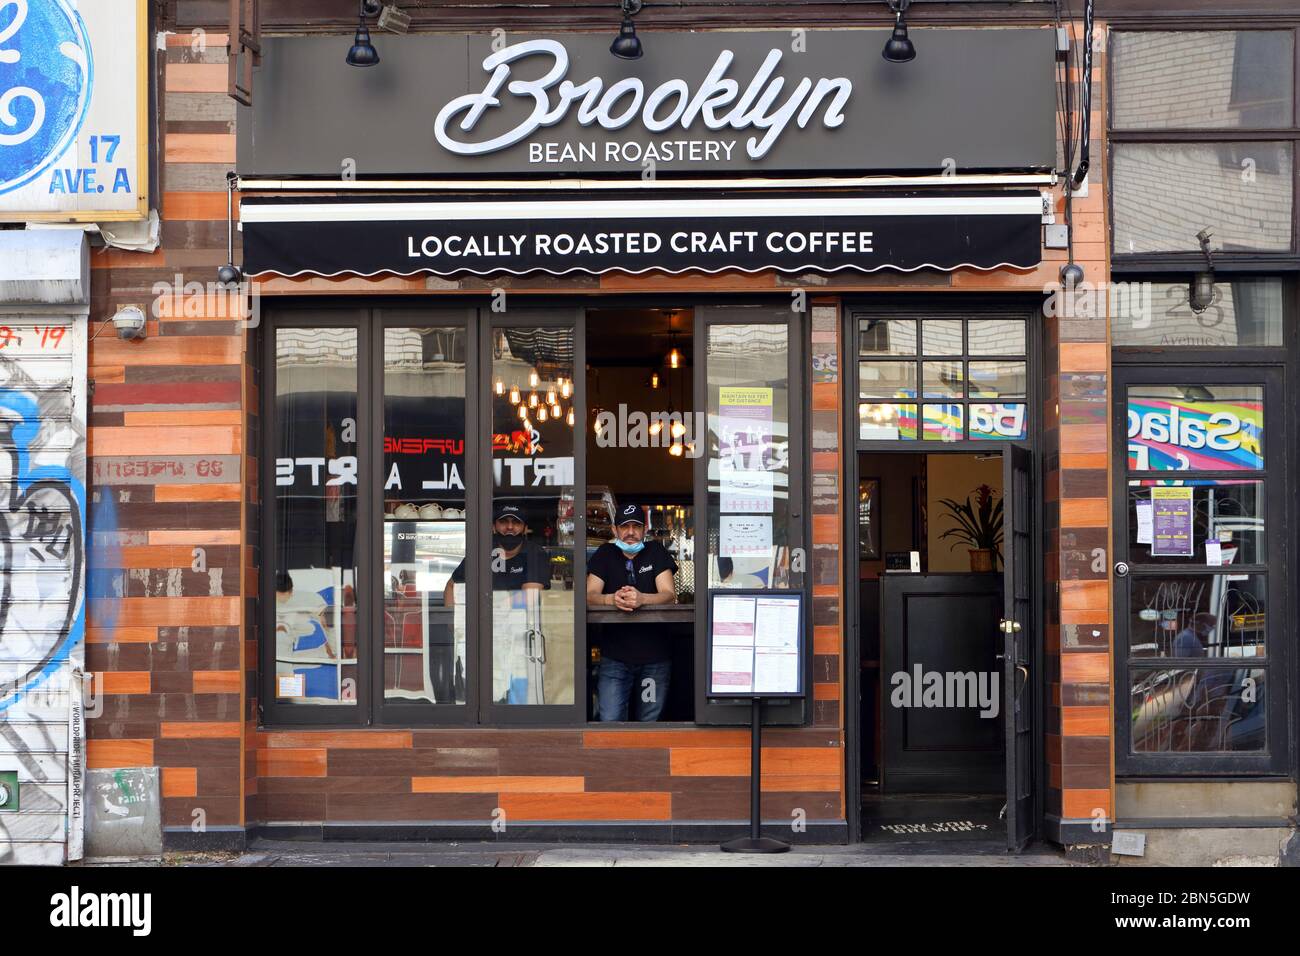 [historical storefront] Brooklyn Bean Roastery, 23 Avenue A, New York, NYC storefront photo of a coffee shop in Manhattan's East Village. Stock Photo